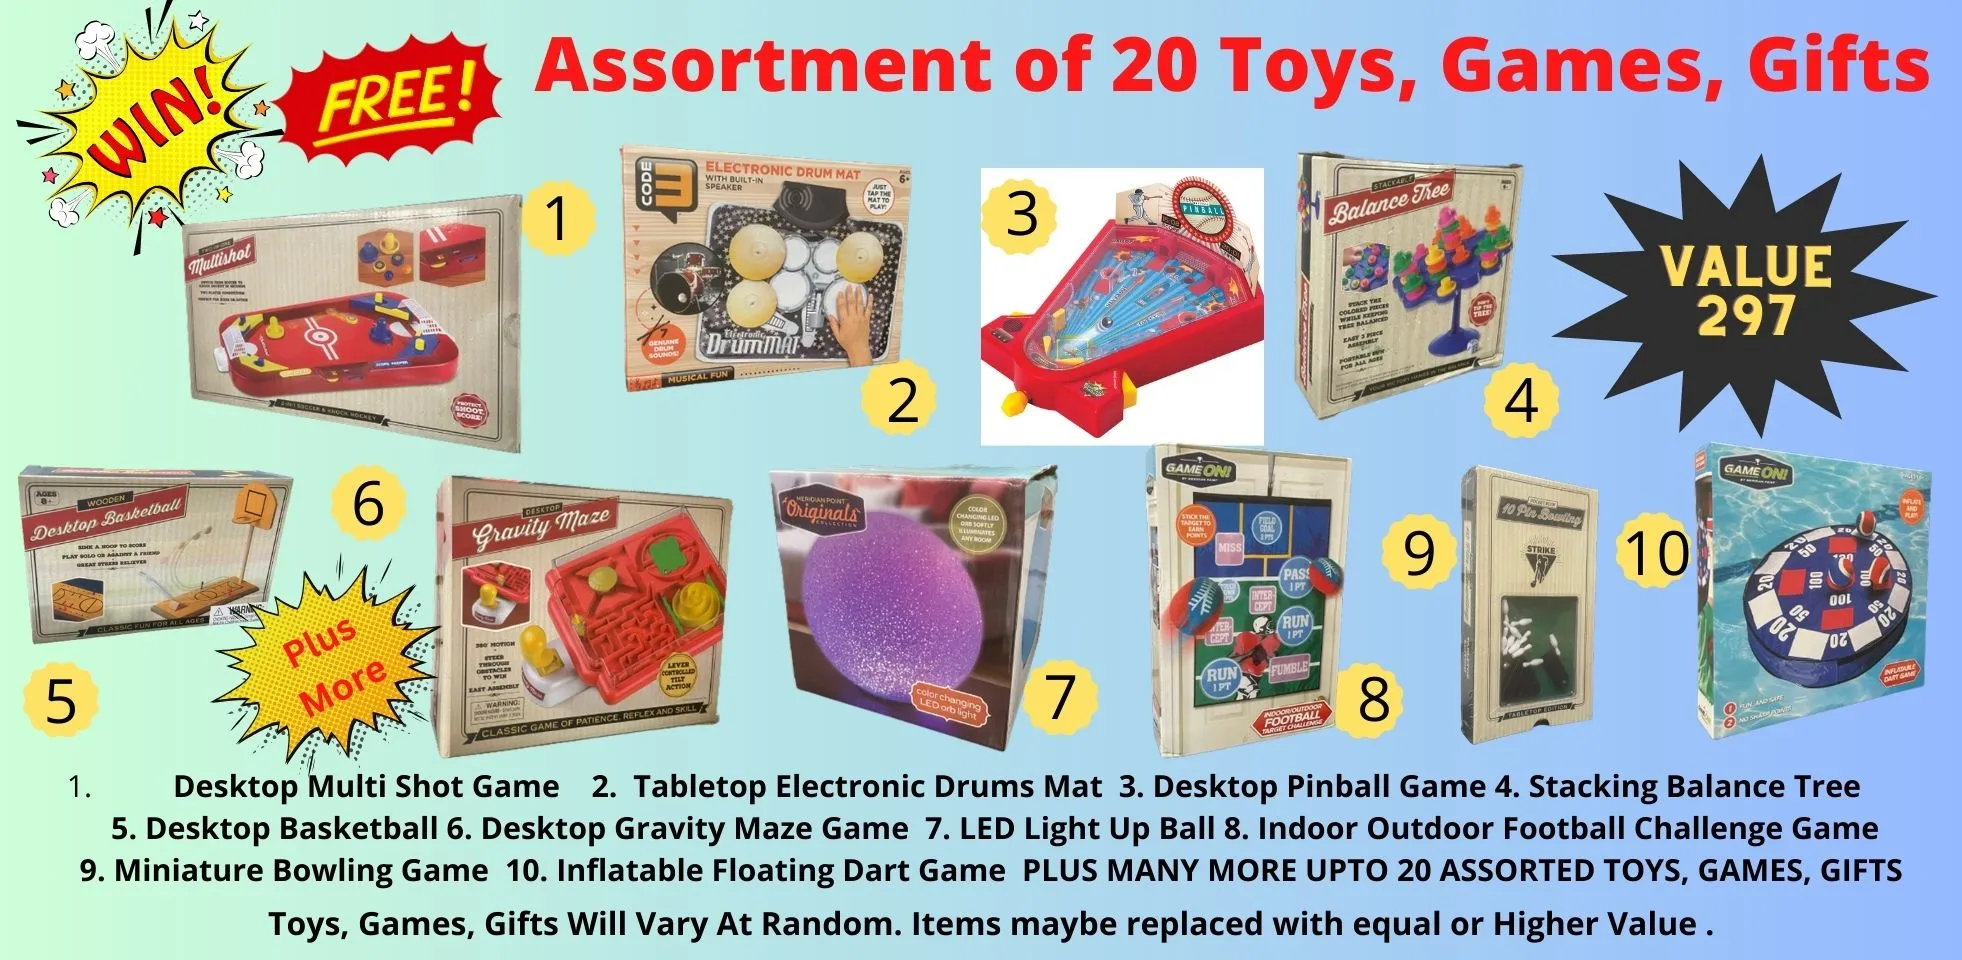 Win Free 20 Assorted Toys, Games, and Gifts